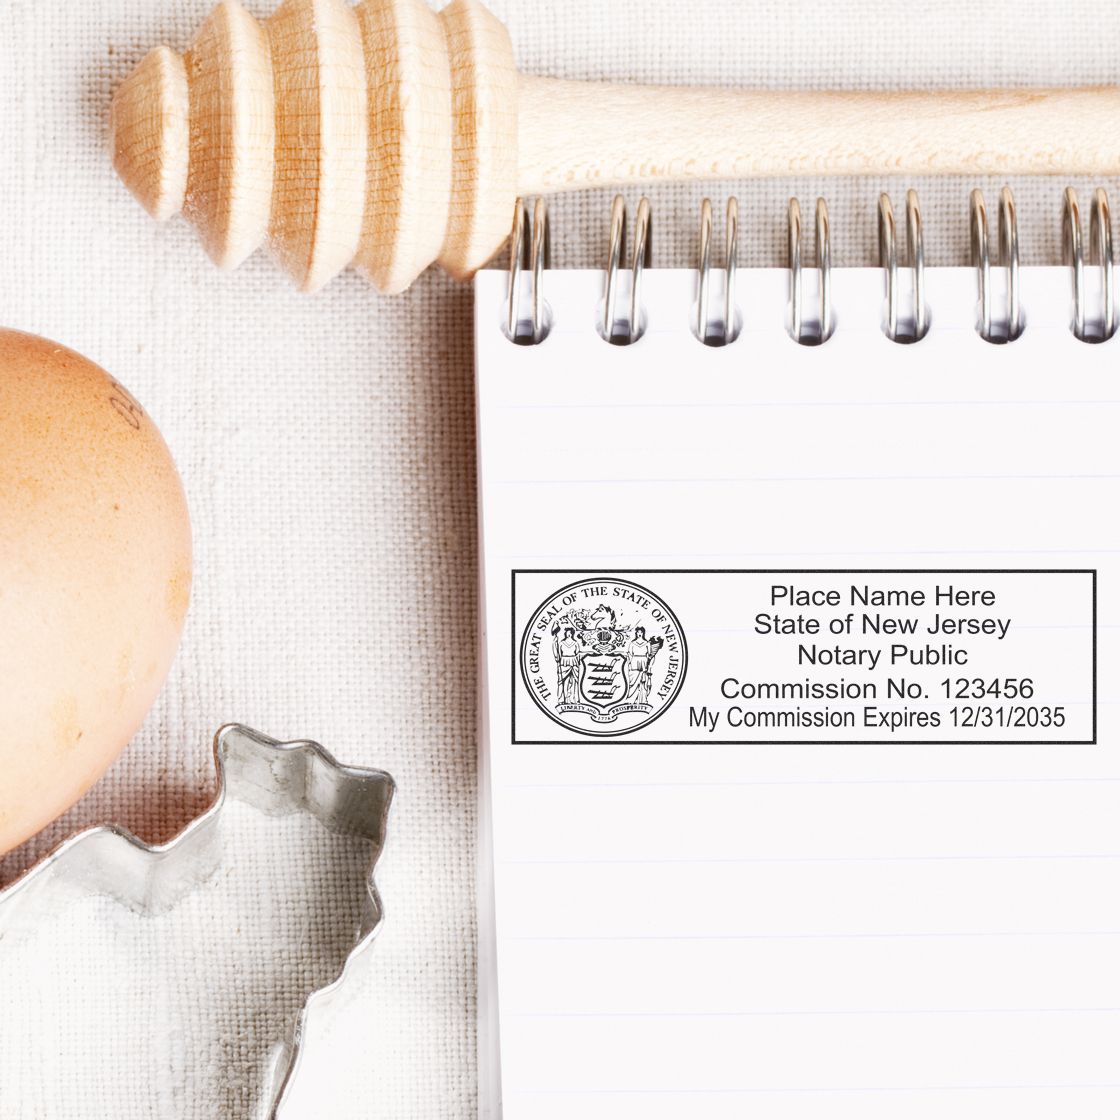 The Super Slim New Jersey Notary Public Stamp stamp impression comes to life with a crisp, detailed photo on paper - showcasing true professional quality.